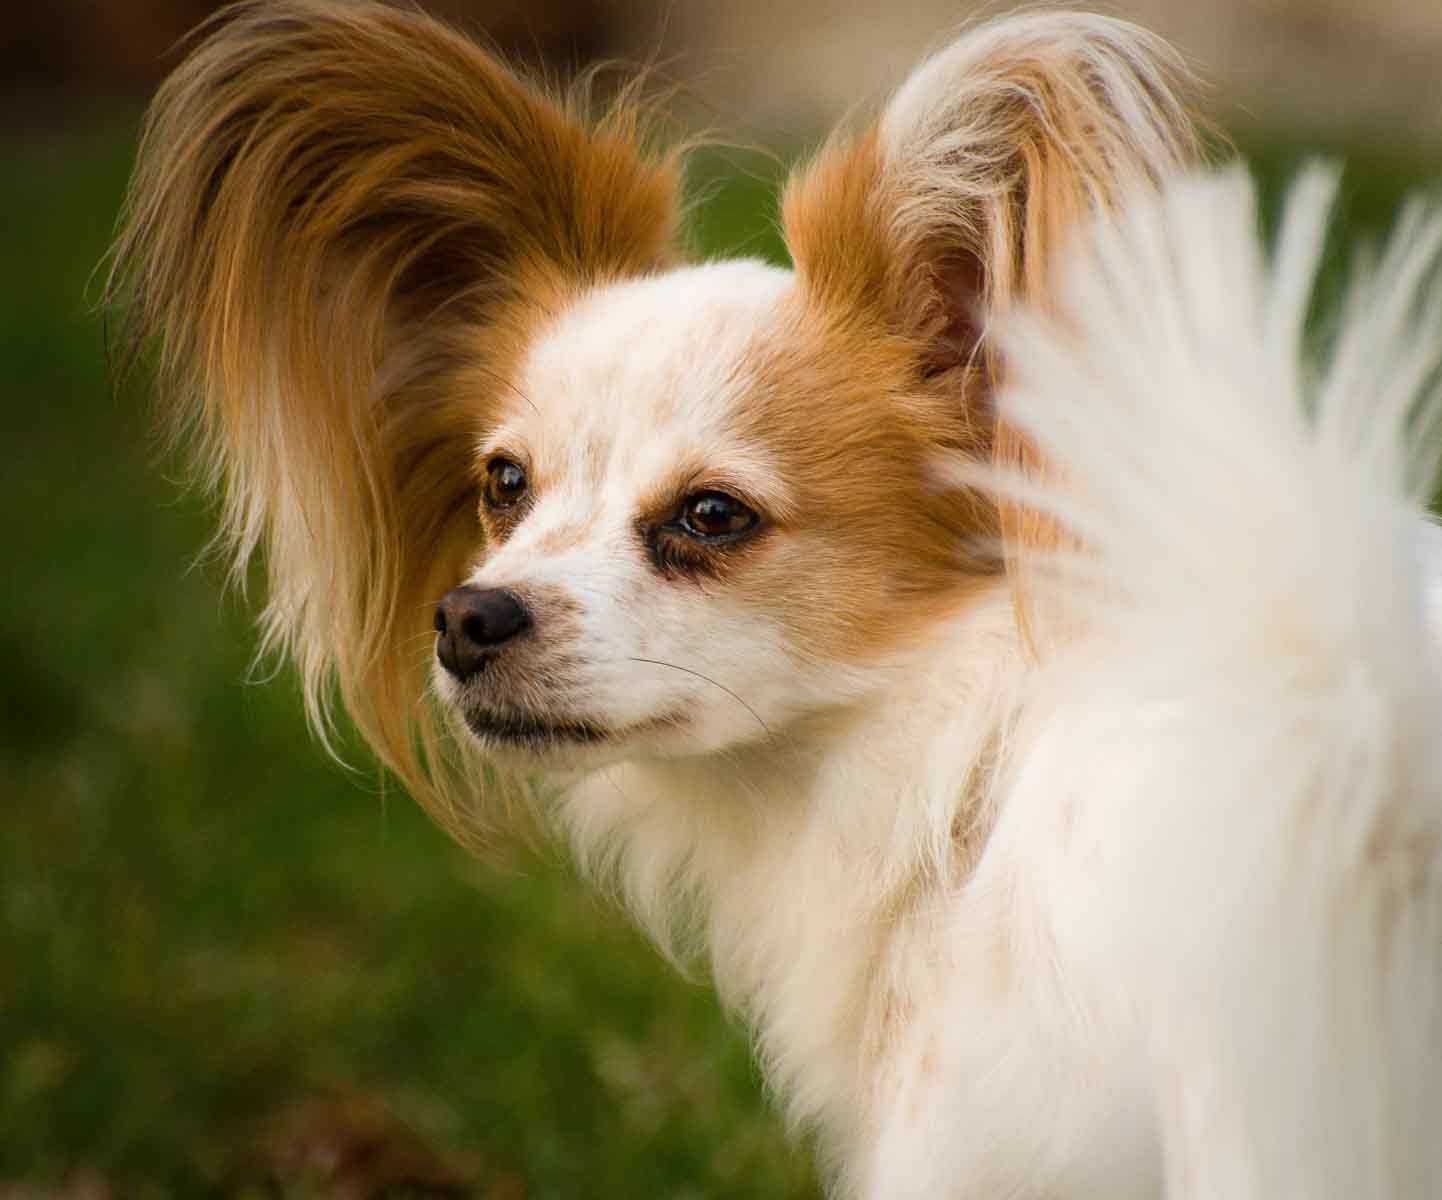 A small dog with long hair on its head.